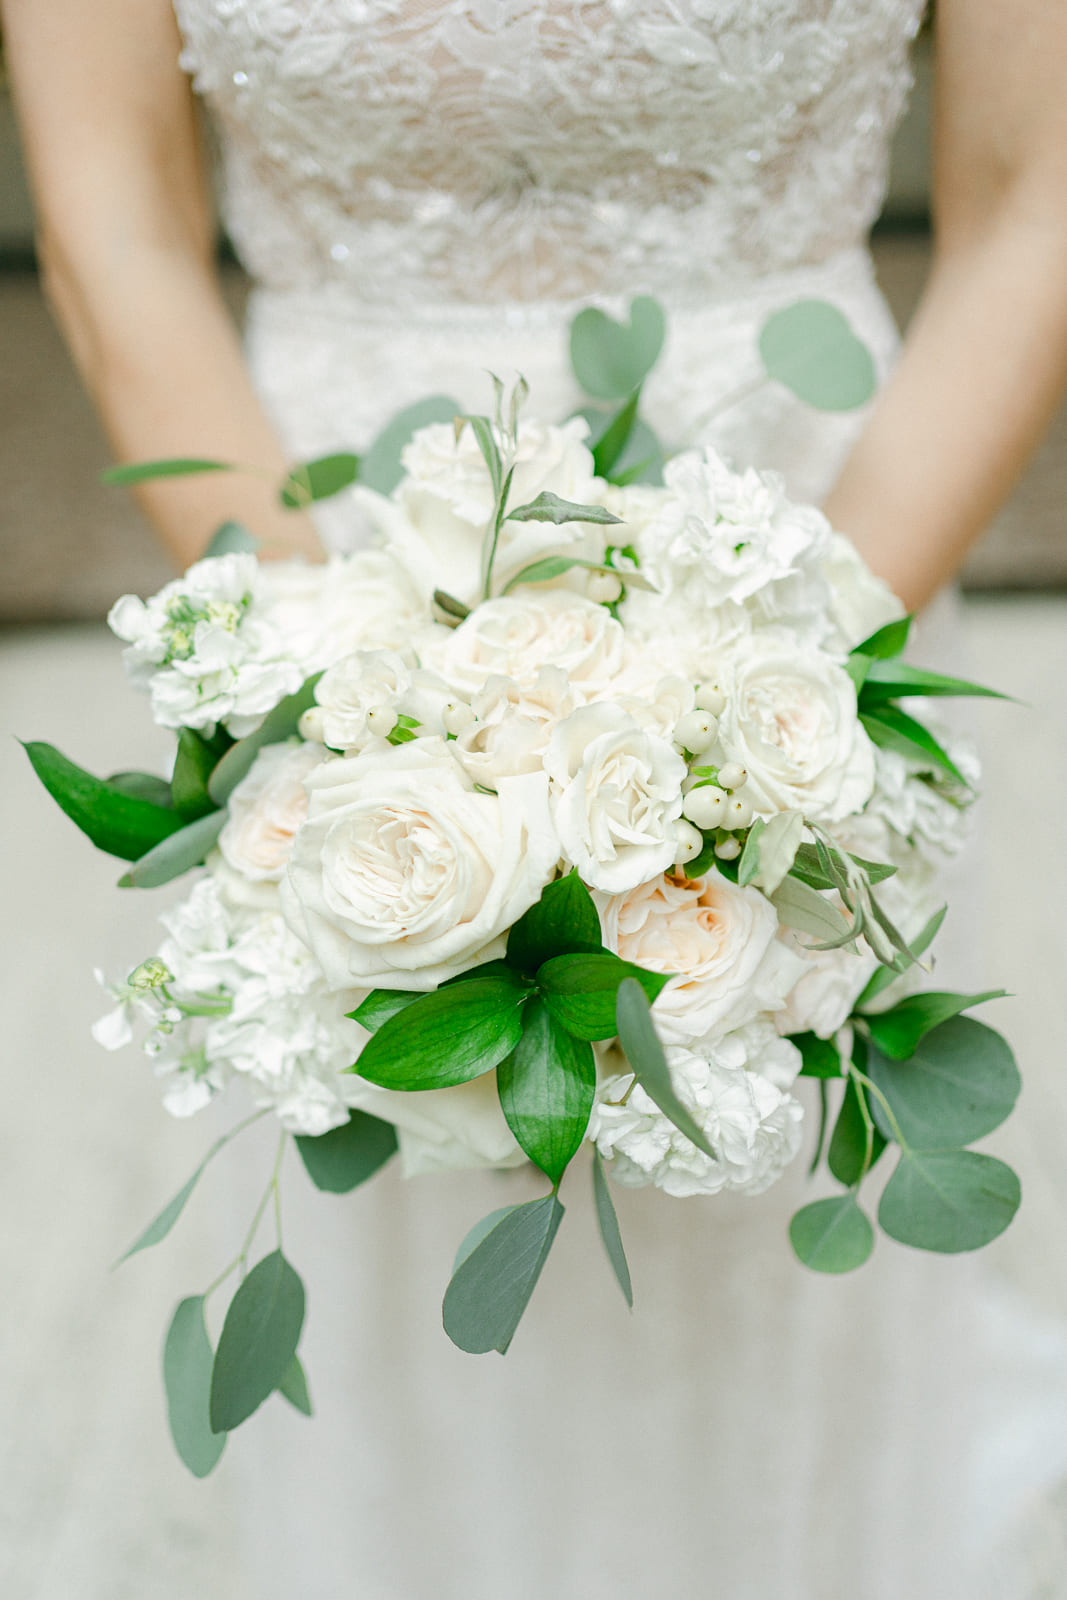 Detail photo of bridal bouquet with white roses and bride in background